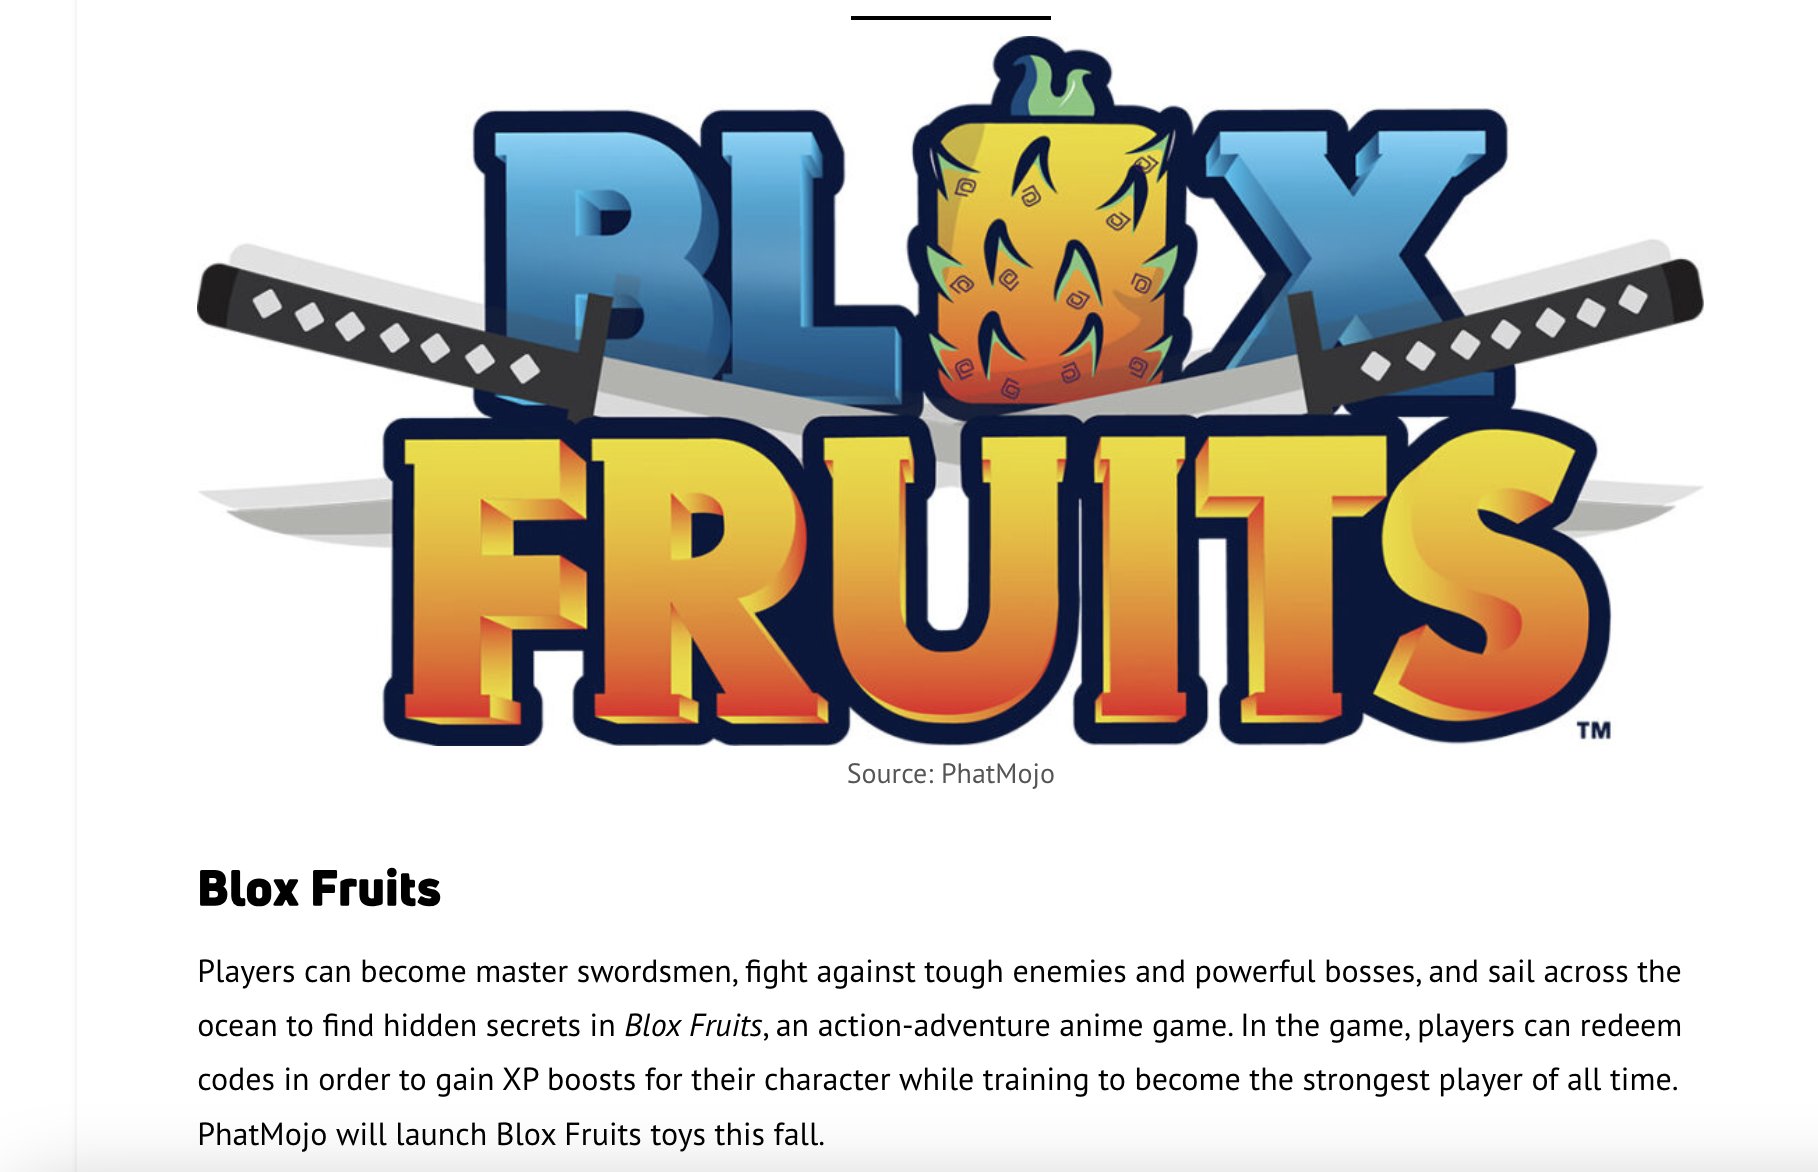 ALL NEW *SECRET* CODES in BLOX FRUITS CODES (Blox Fruits Codes